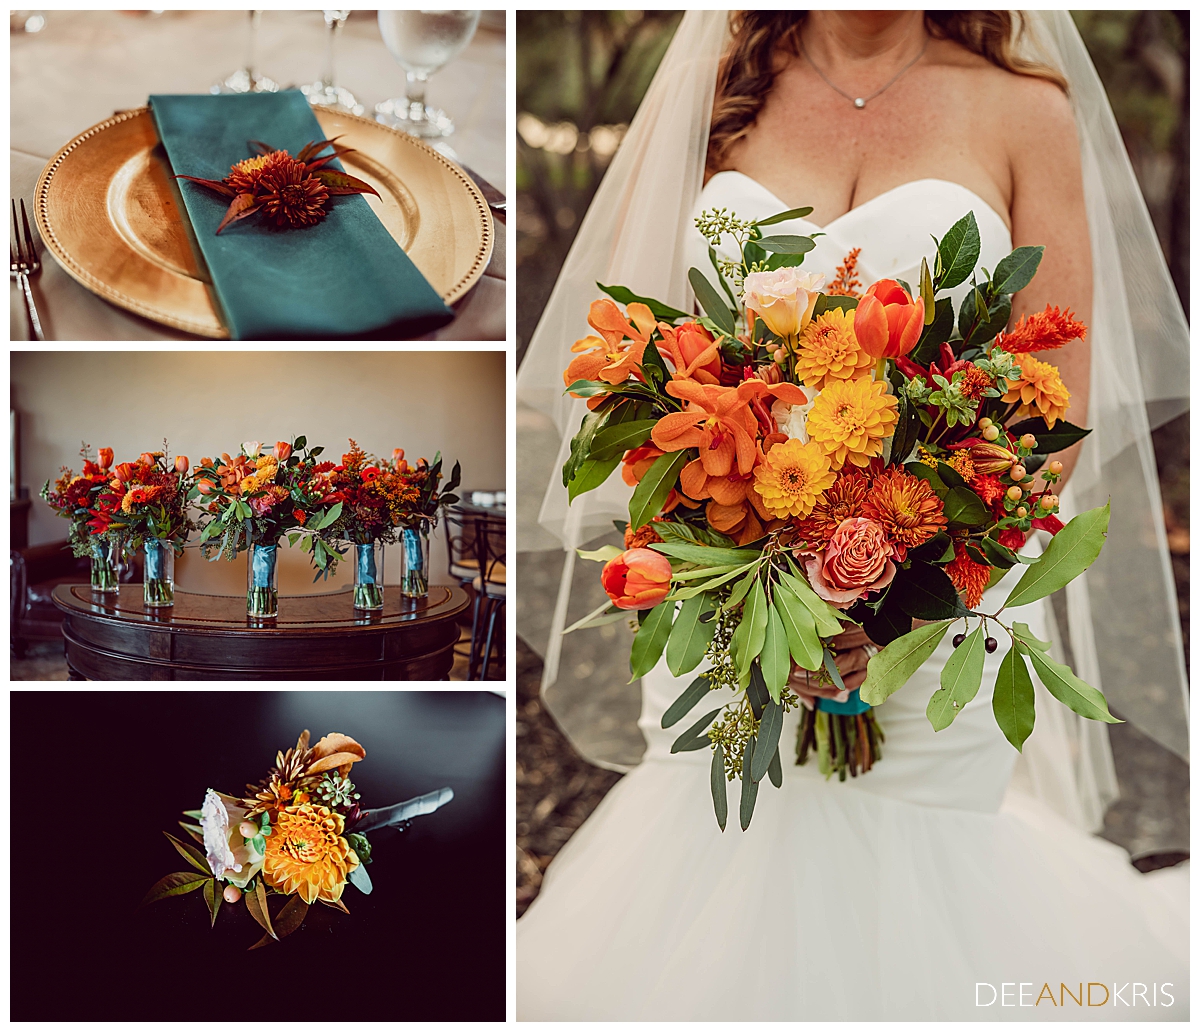 Four images: Top left image of table setting. Center left image of bouquets in their vases lined up. Bottom left image of boutonniere, Right image close up of bride's bouquet.